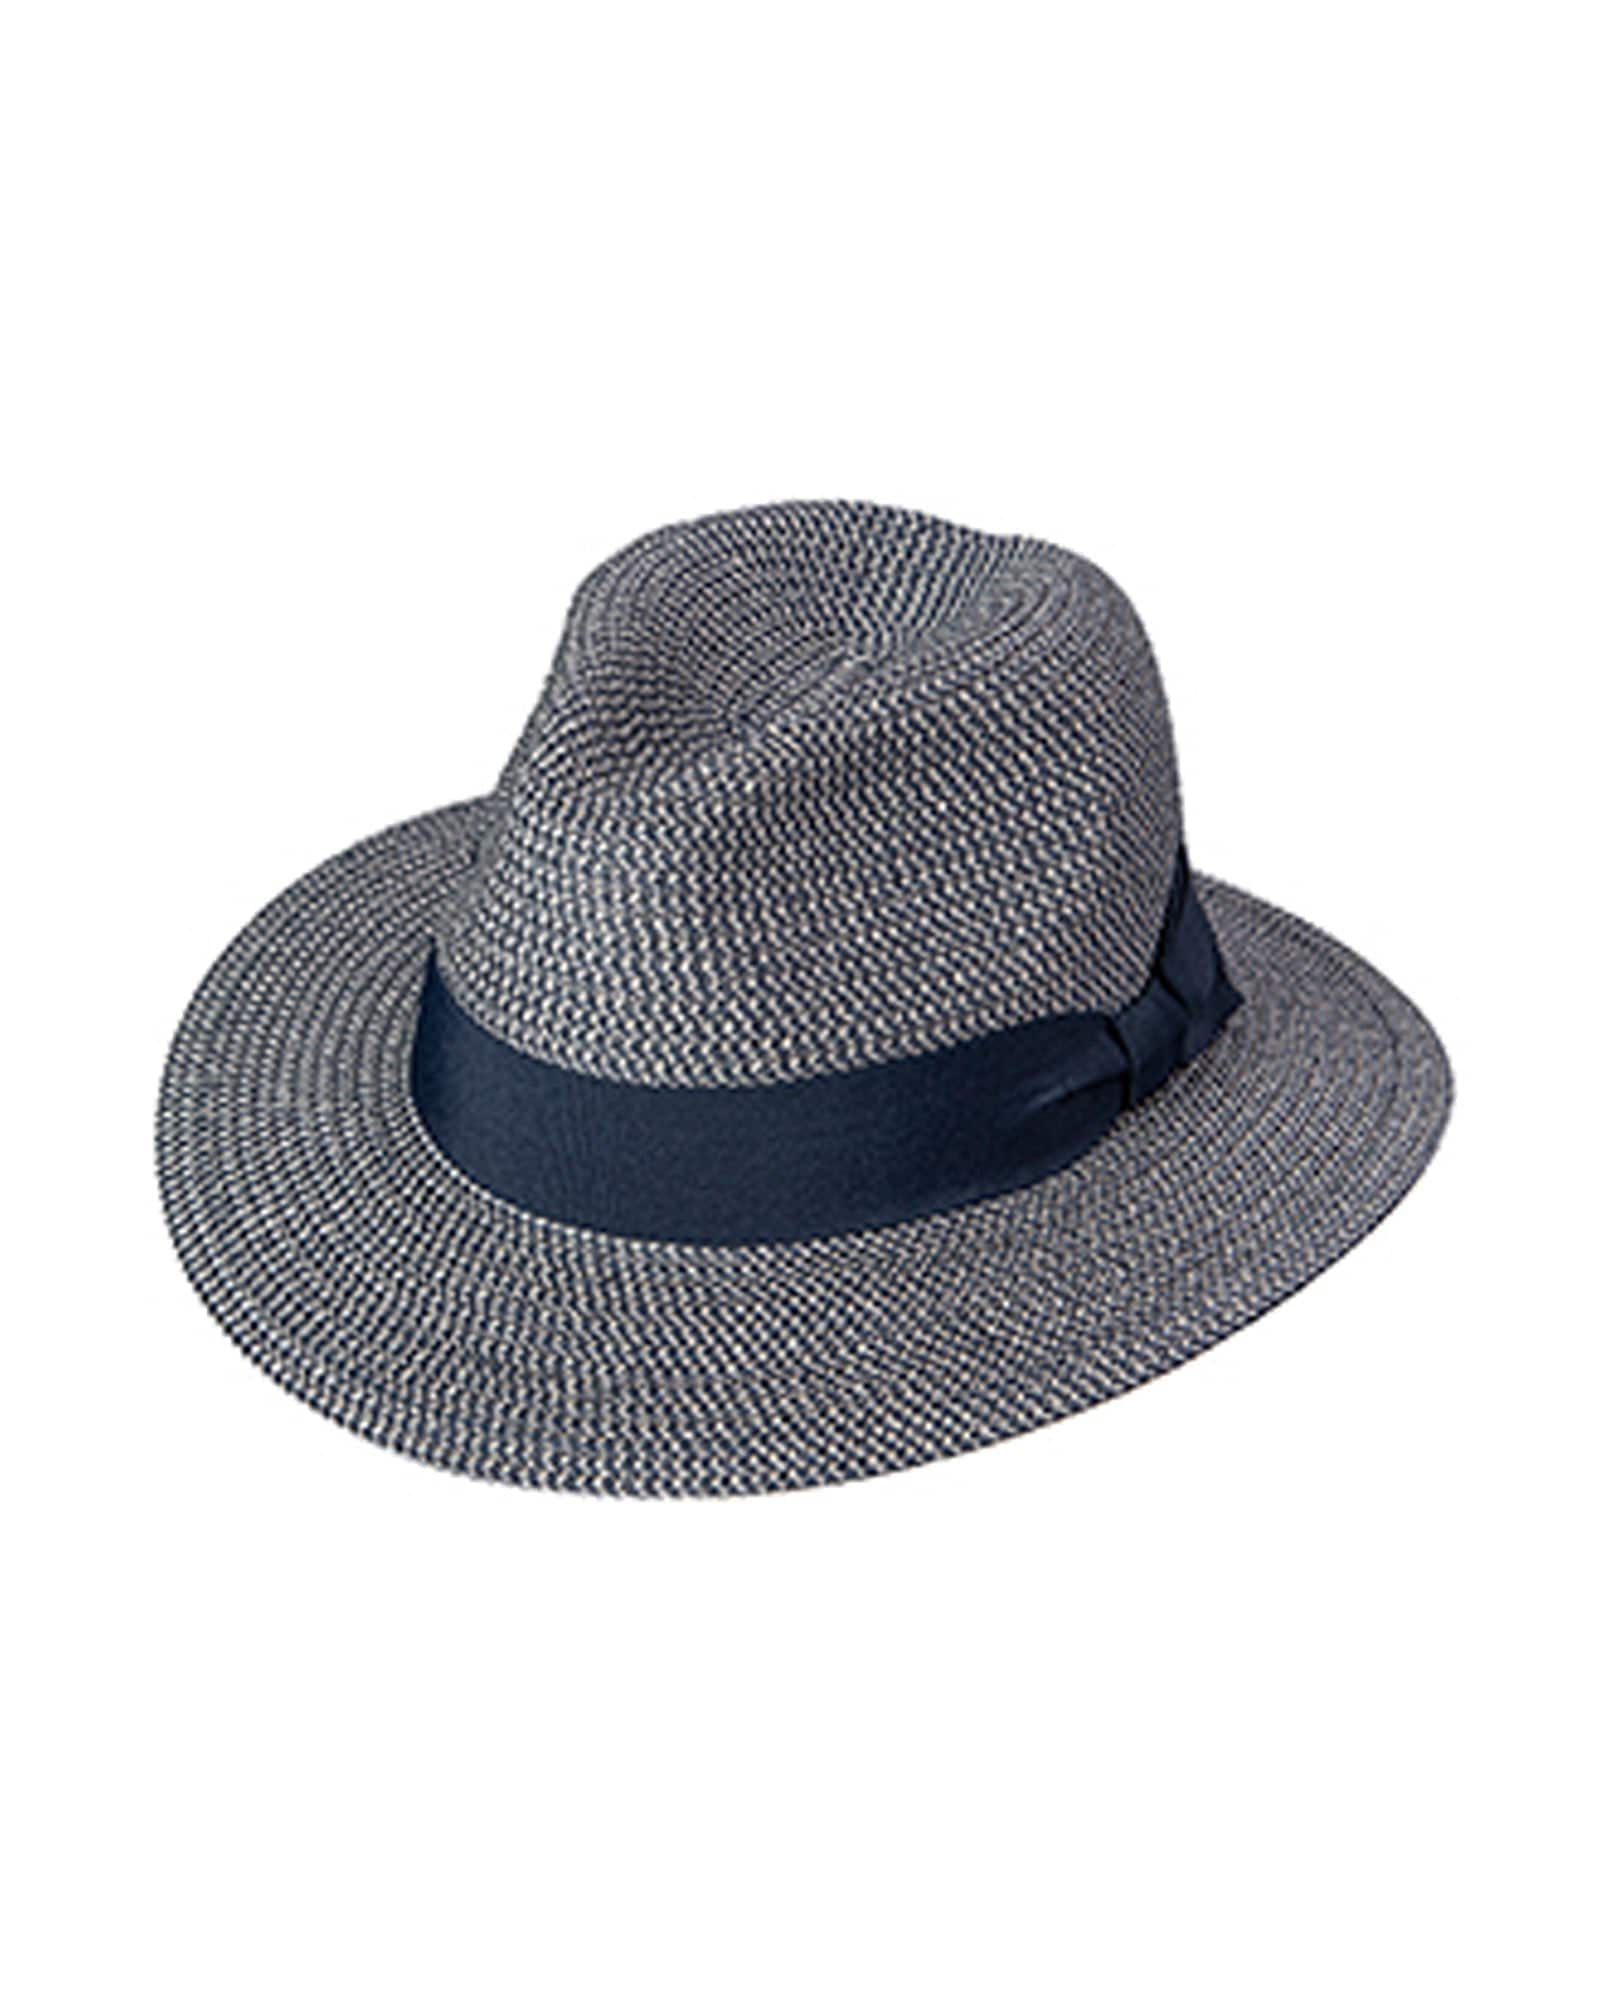 Broner Suitable Marled Navy Straw Fedora with 2.5 inch brim - Rainwater's Men's Clothing and Tuxedo Rental